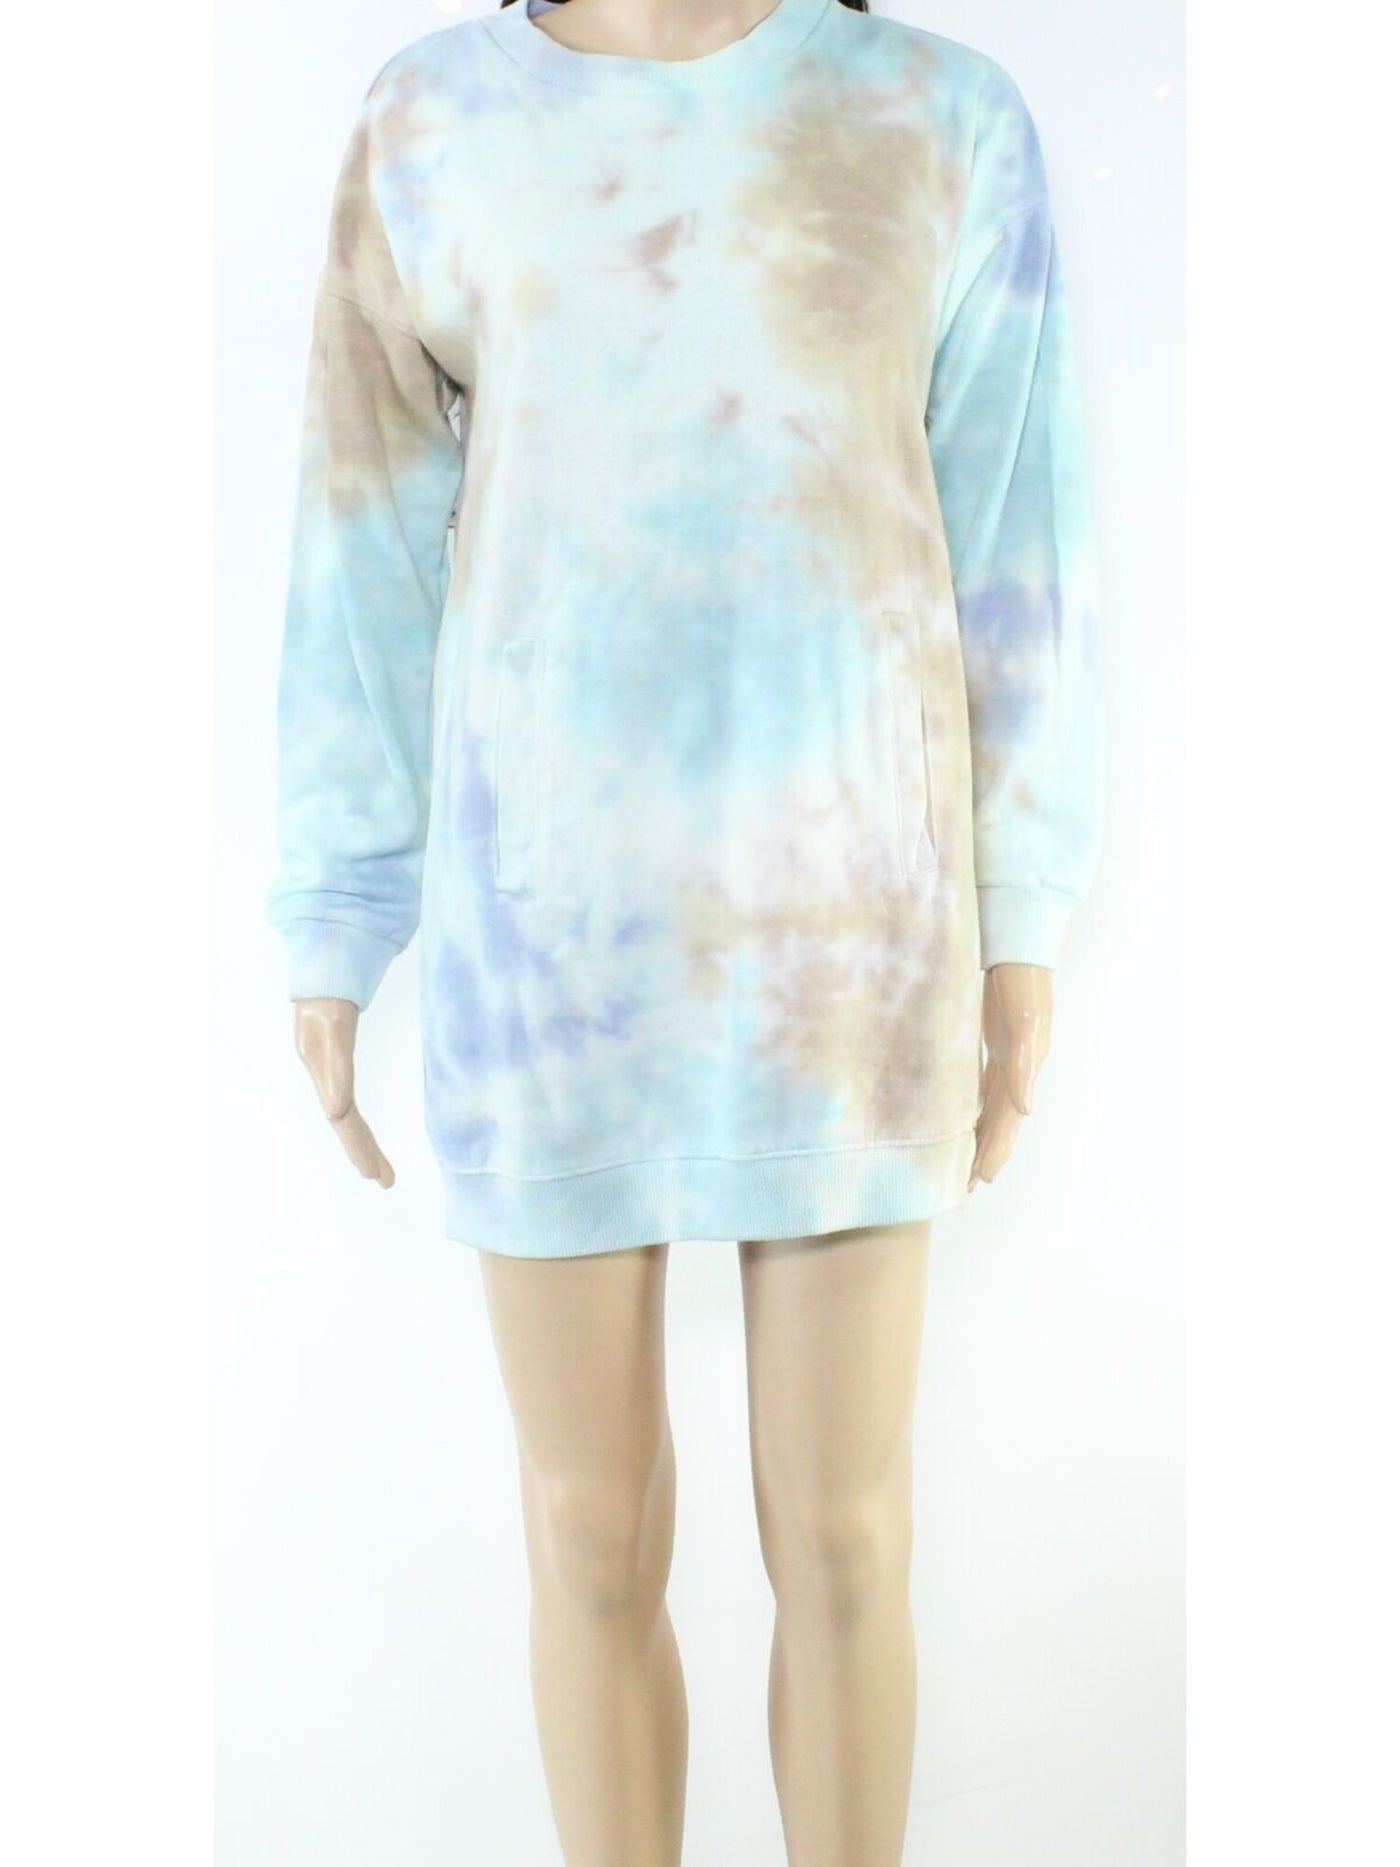 NO COMMENT Womens Light Blue Pocketed Ribbed Cuffs And Hem Tie Dye Long Sleeve Crew Neck Short Shift Dress S